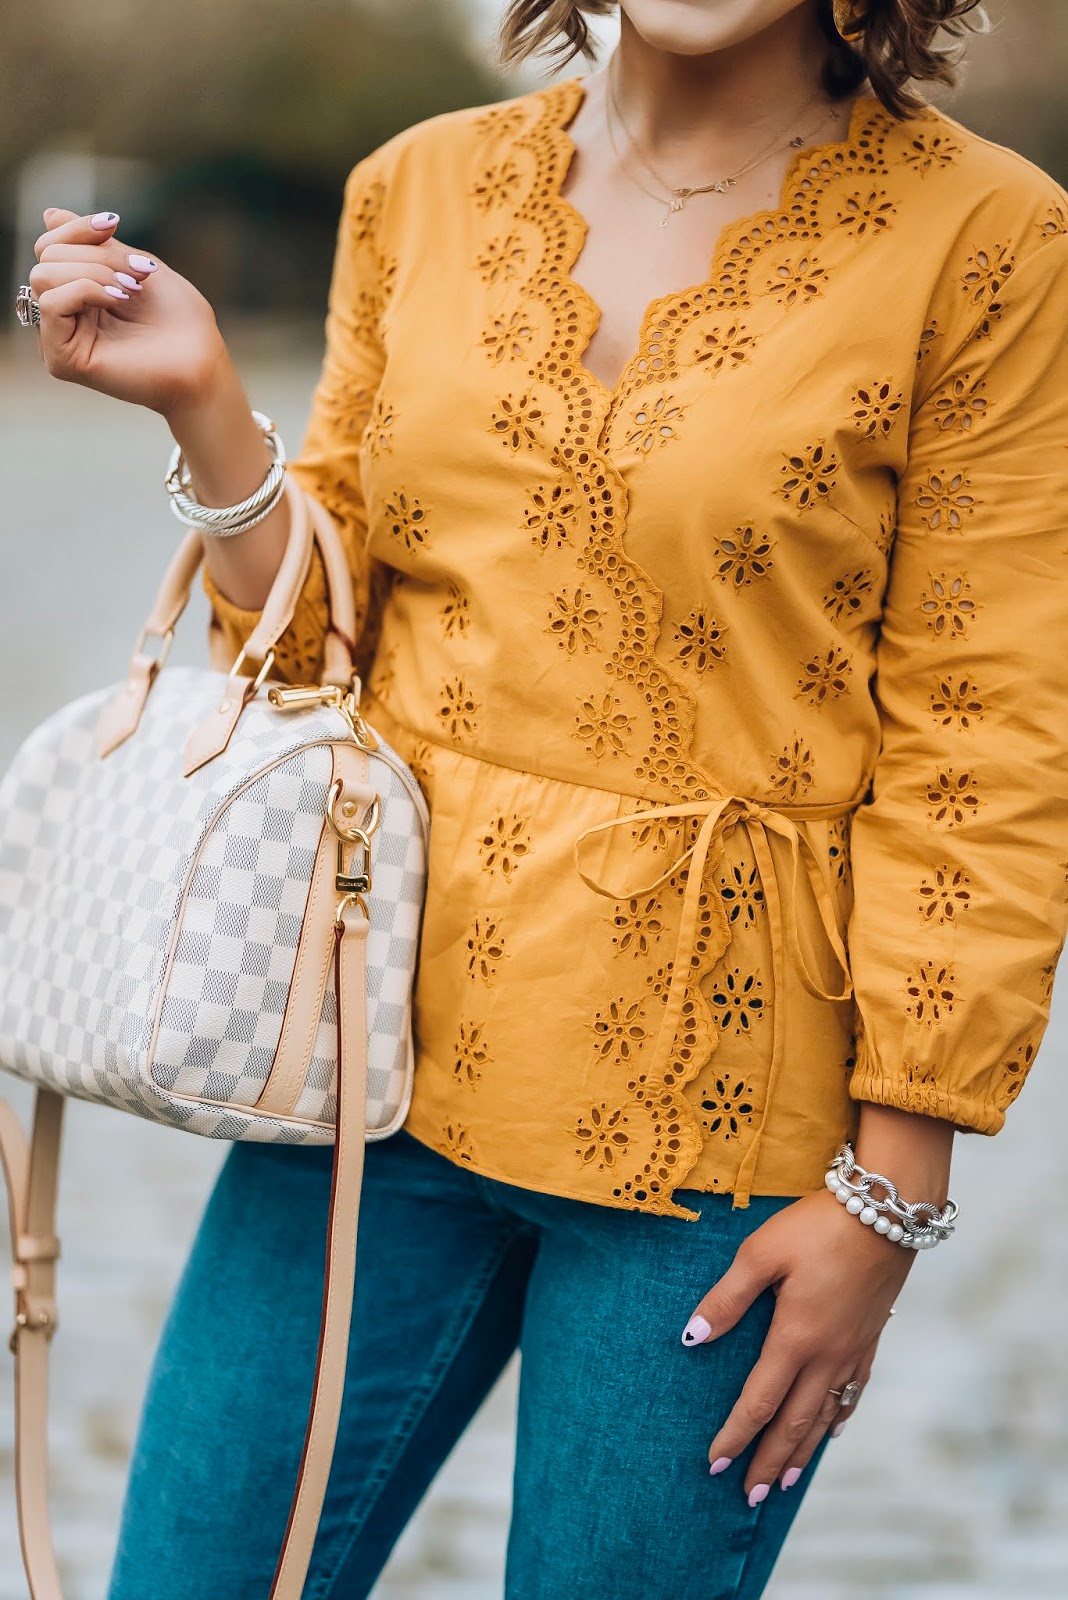 Yellow Scallop Eyelet Wrap Top for Spring + My New Favorite Jeans  - Something Delightful Blog